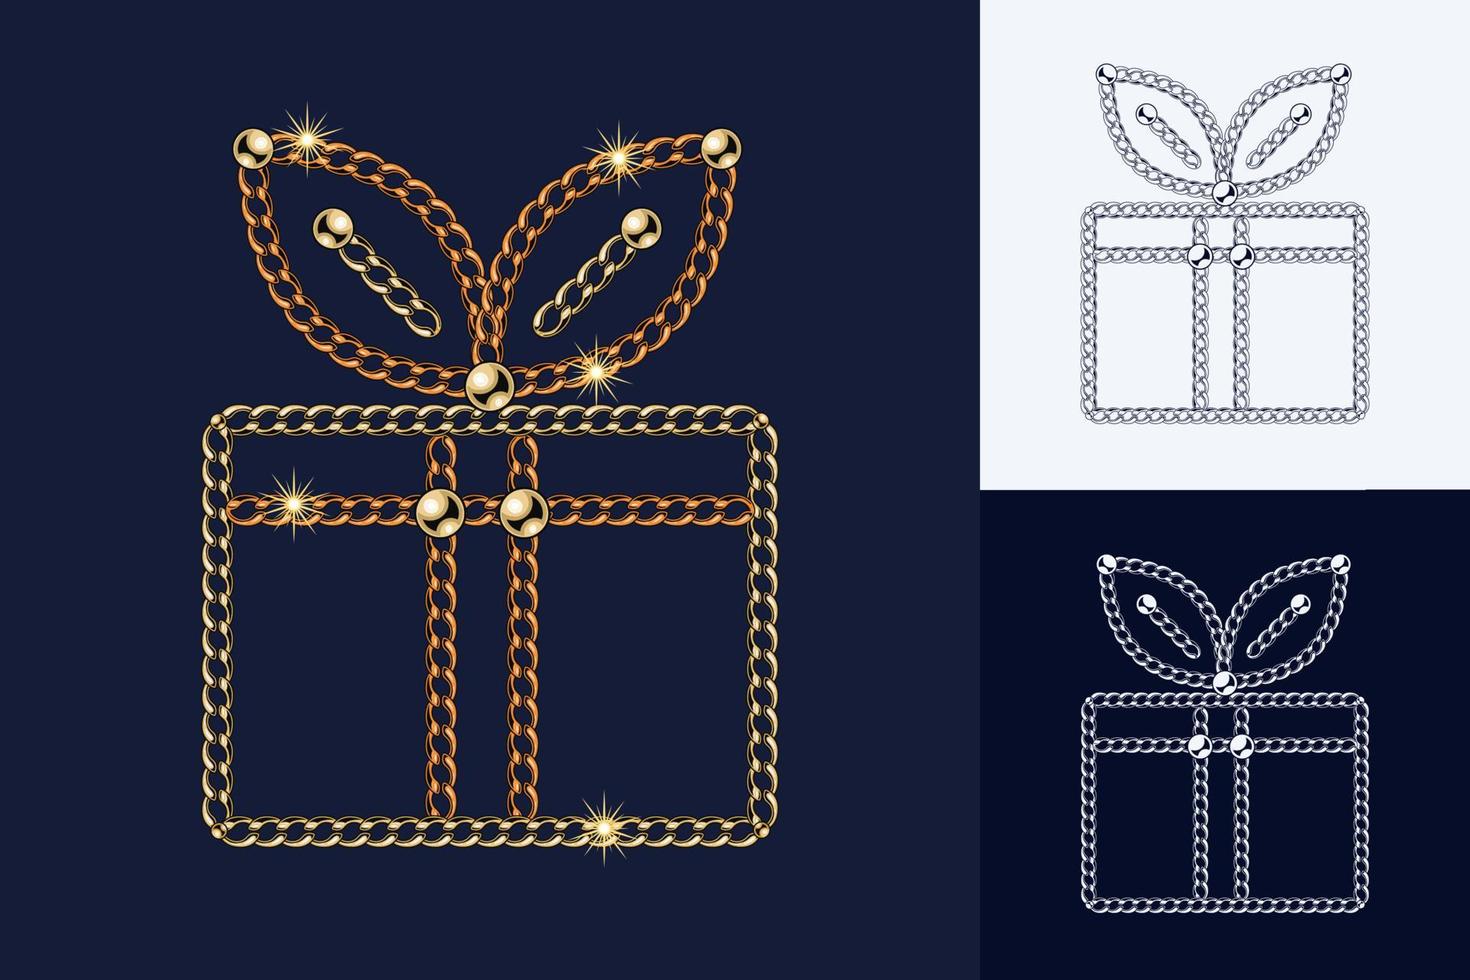 Fancy gift box made of jewelry gold, bronze chains, shiny ball beads. Elegant jewelry illustration for sales, christmas, new year holiday, party, birthday decoration Monochrome black and white version vector